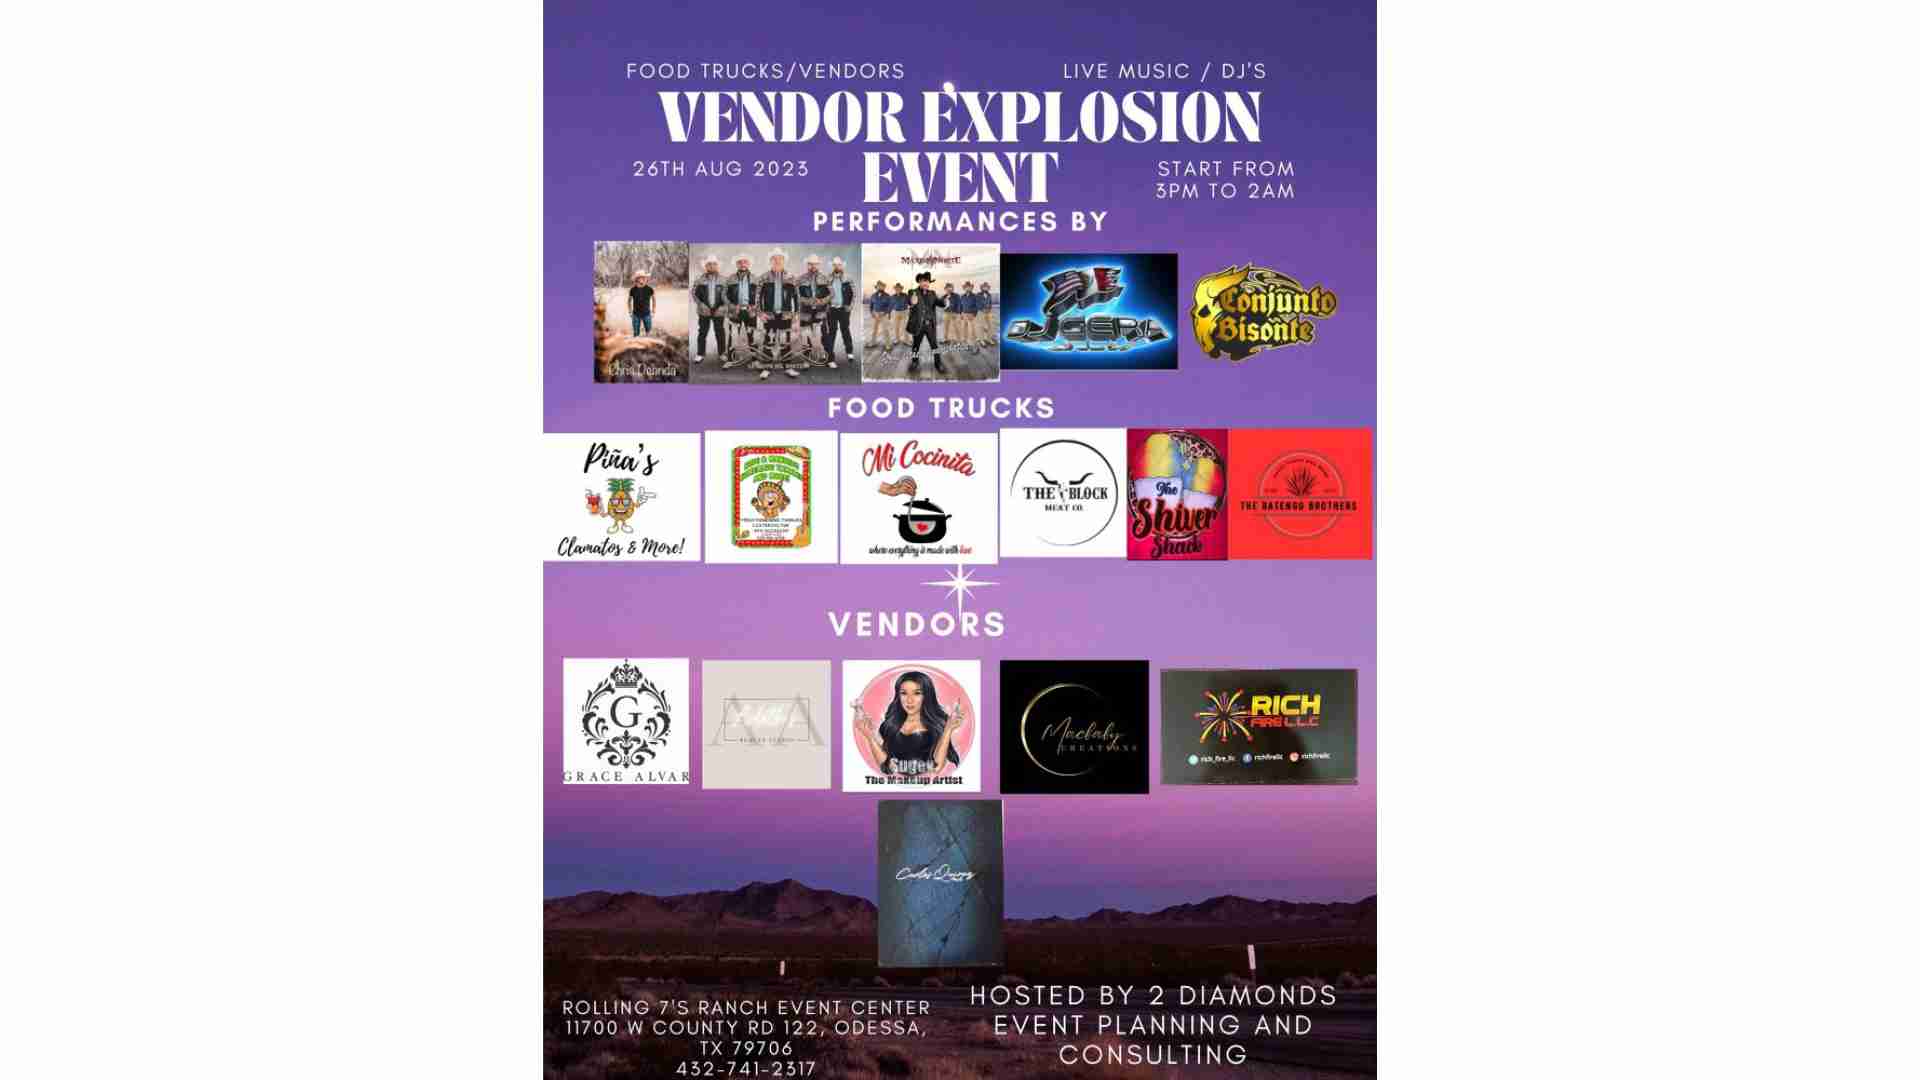 Vendor Event at Rolling 7's Ranch Event on August 26, 2023 in Odessa, TX